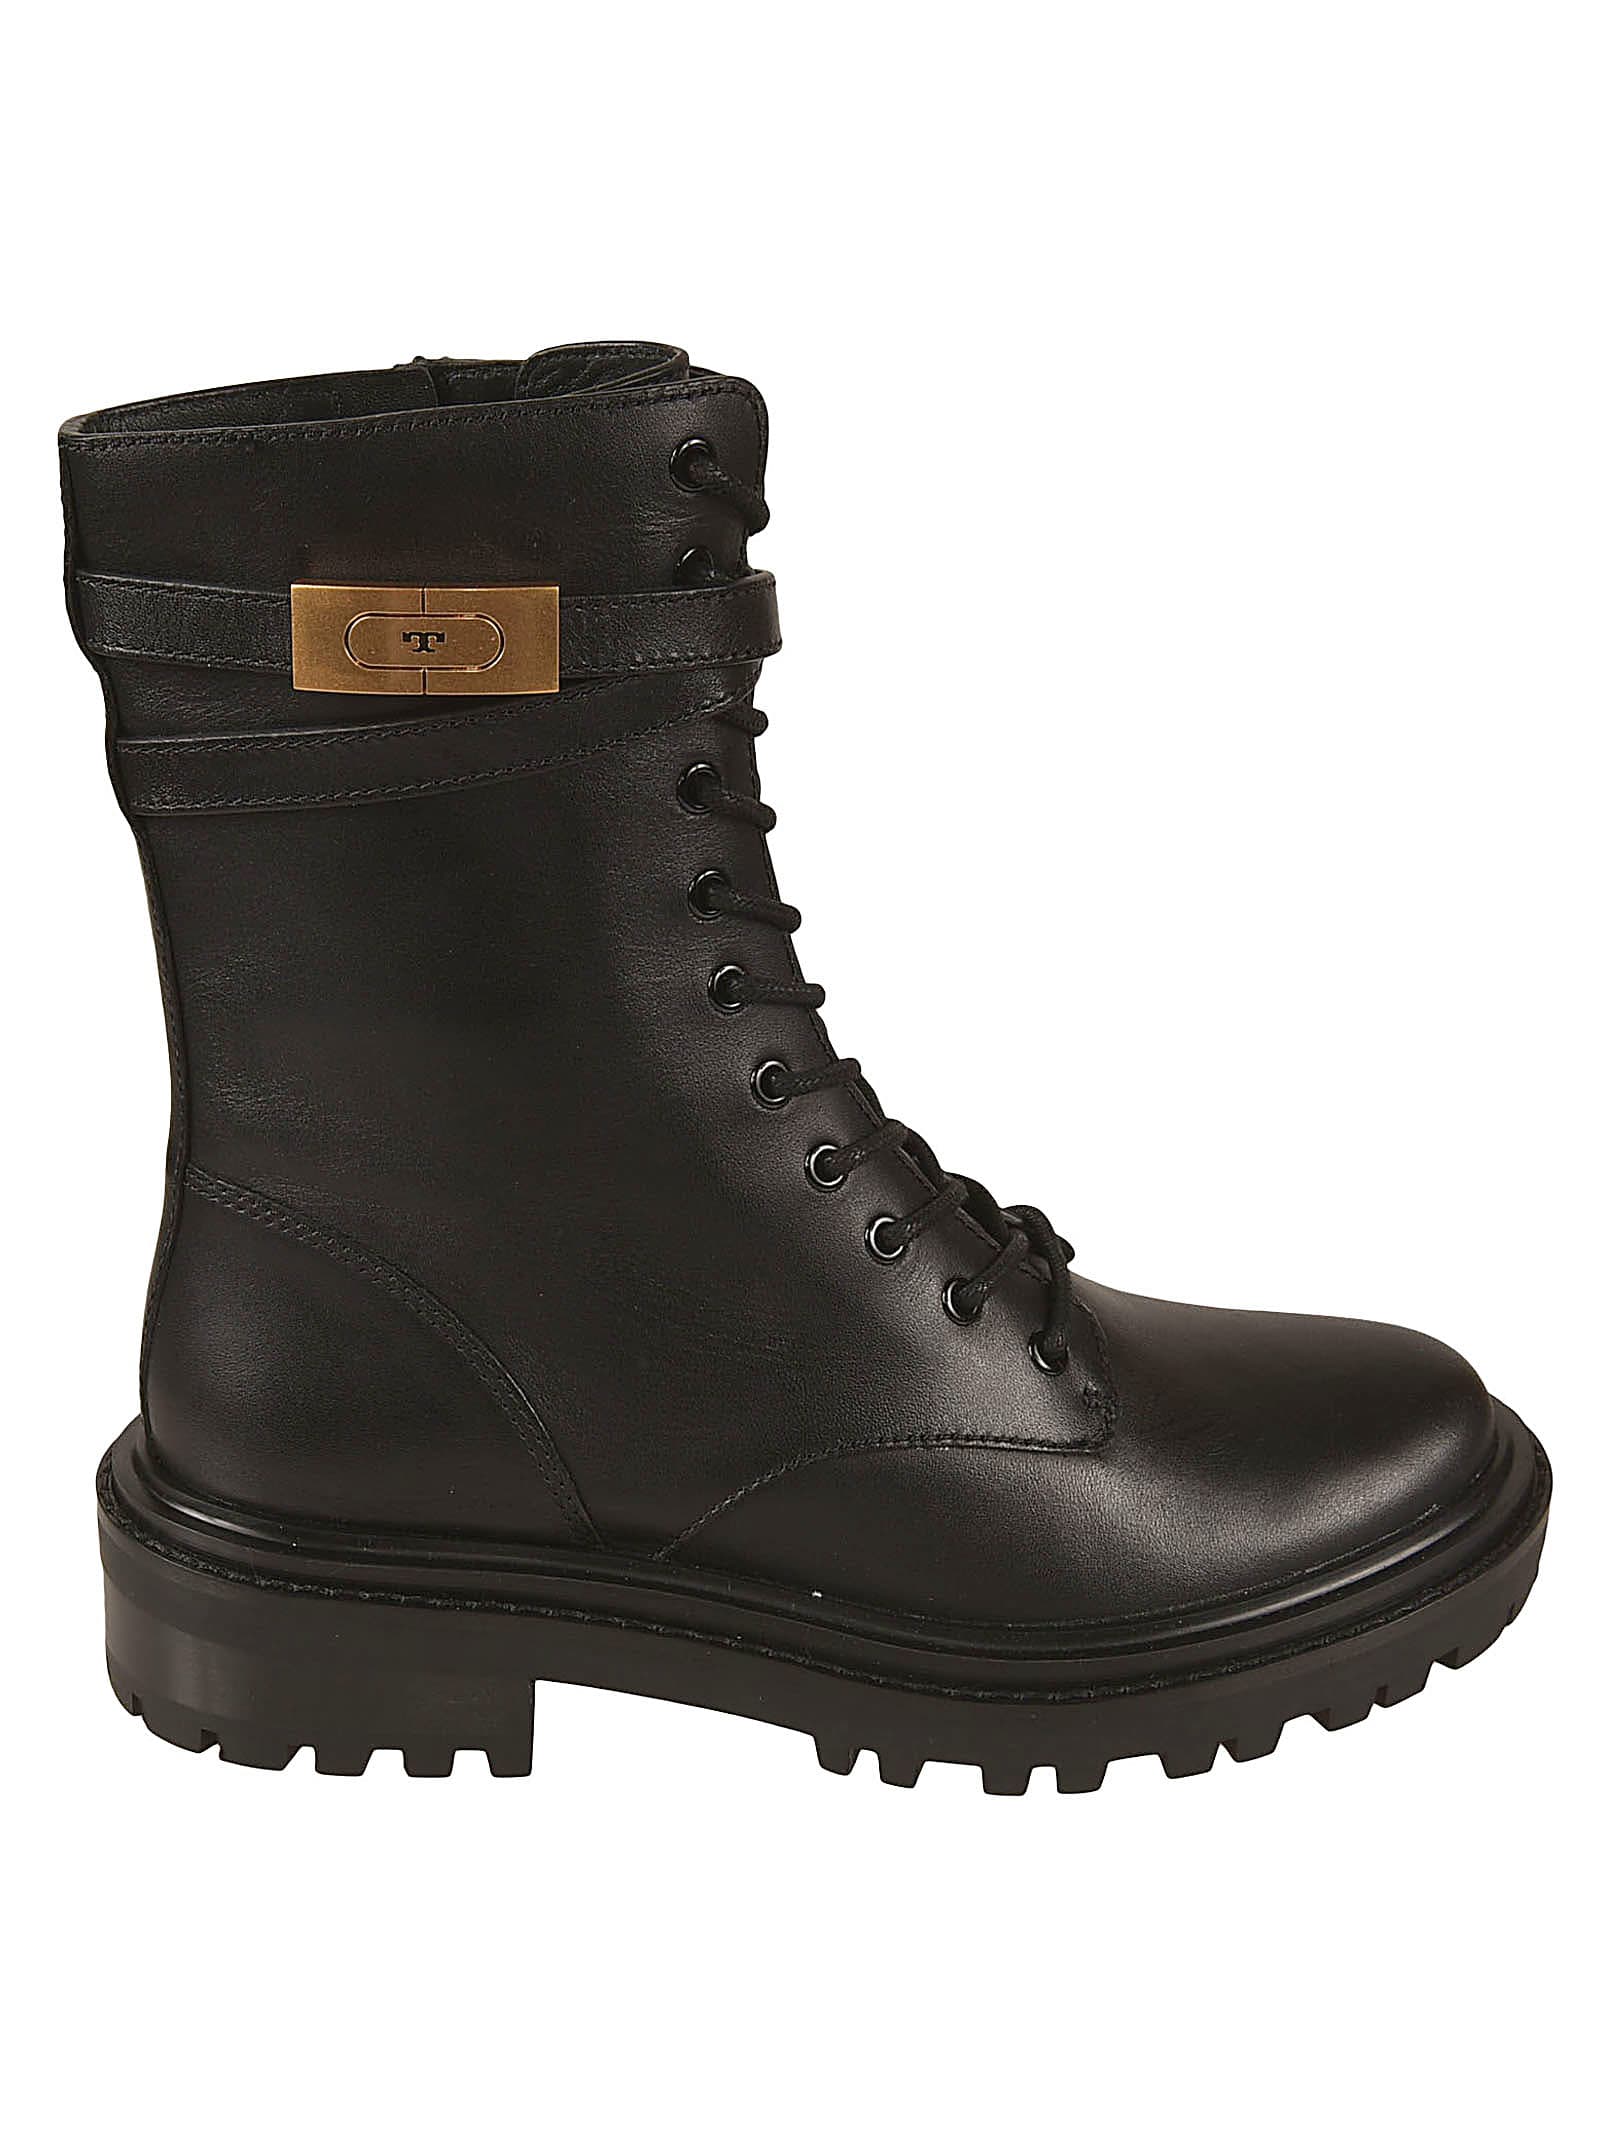 Tory Burch T Hardware Combat Boots